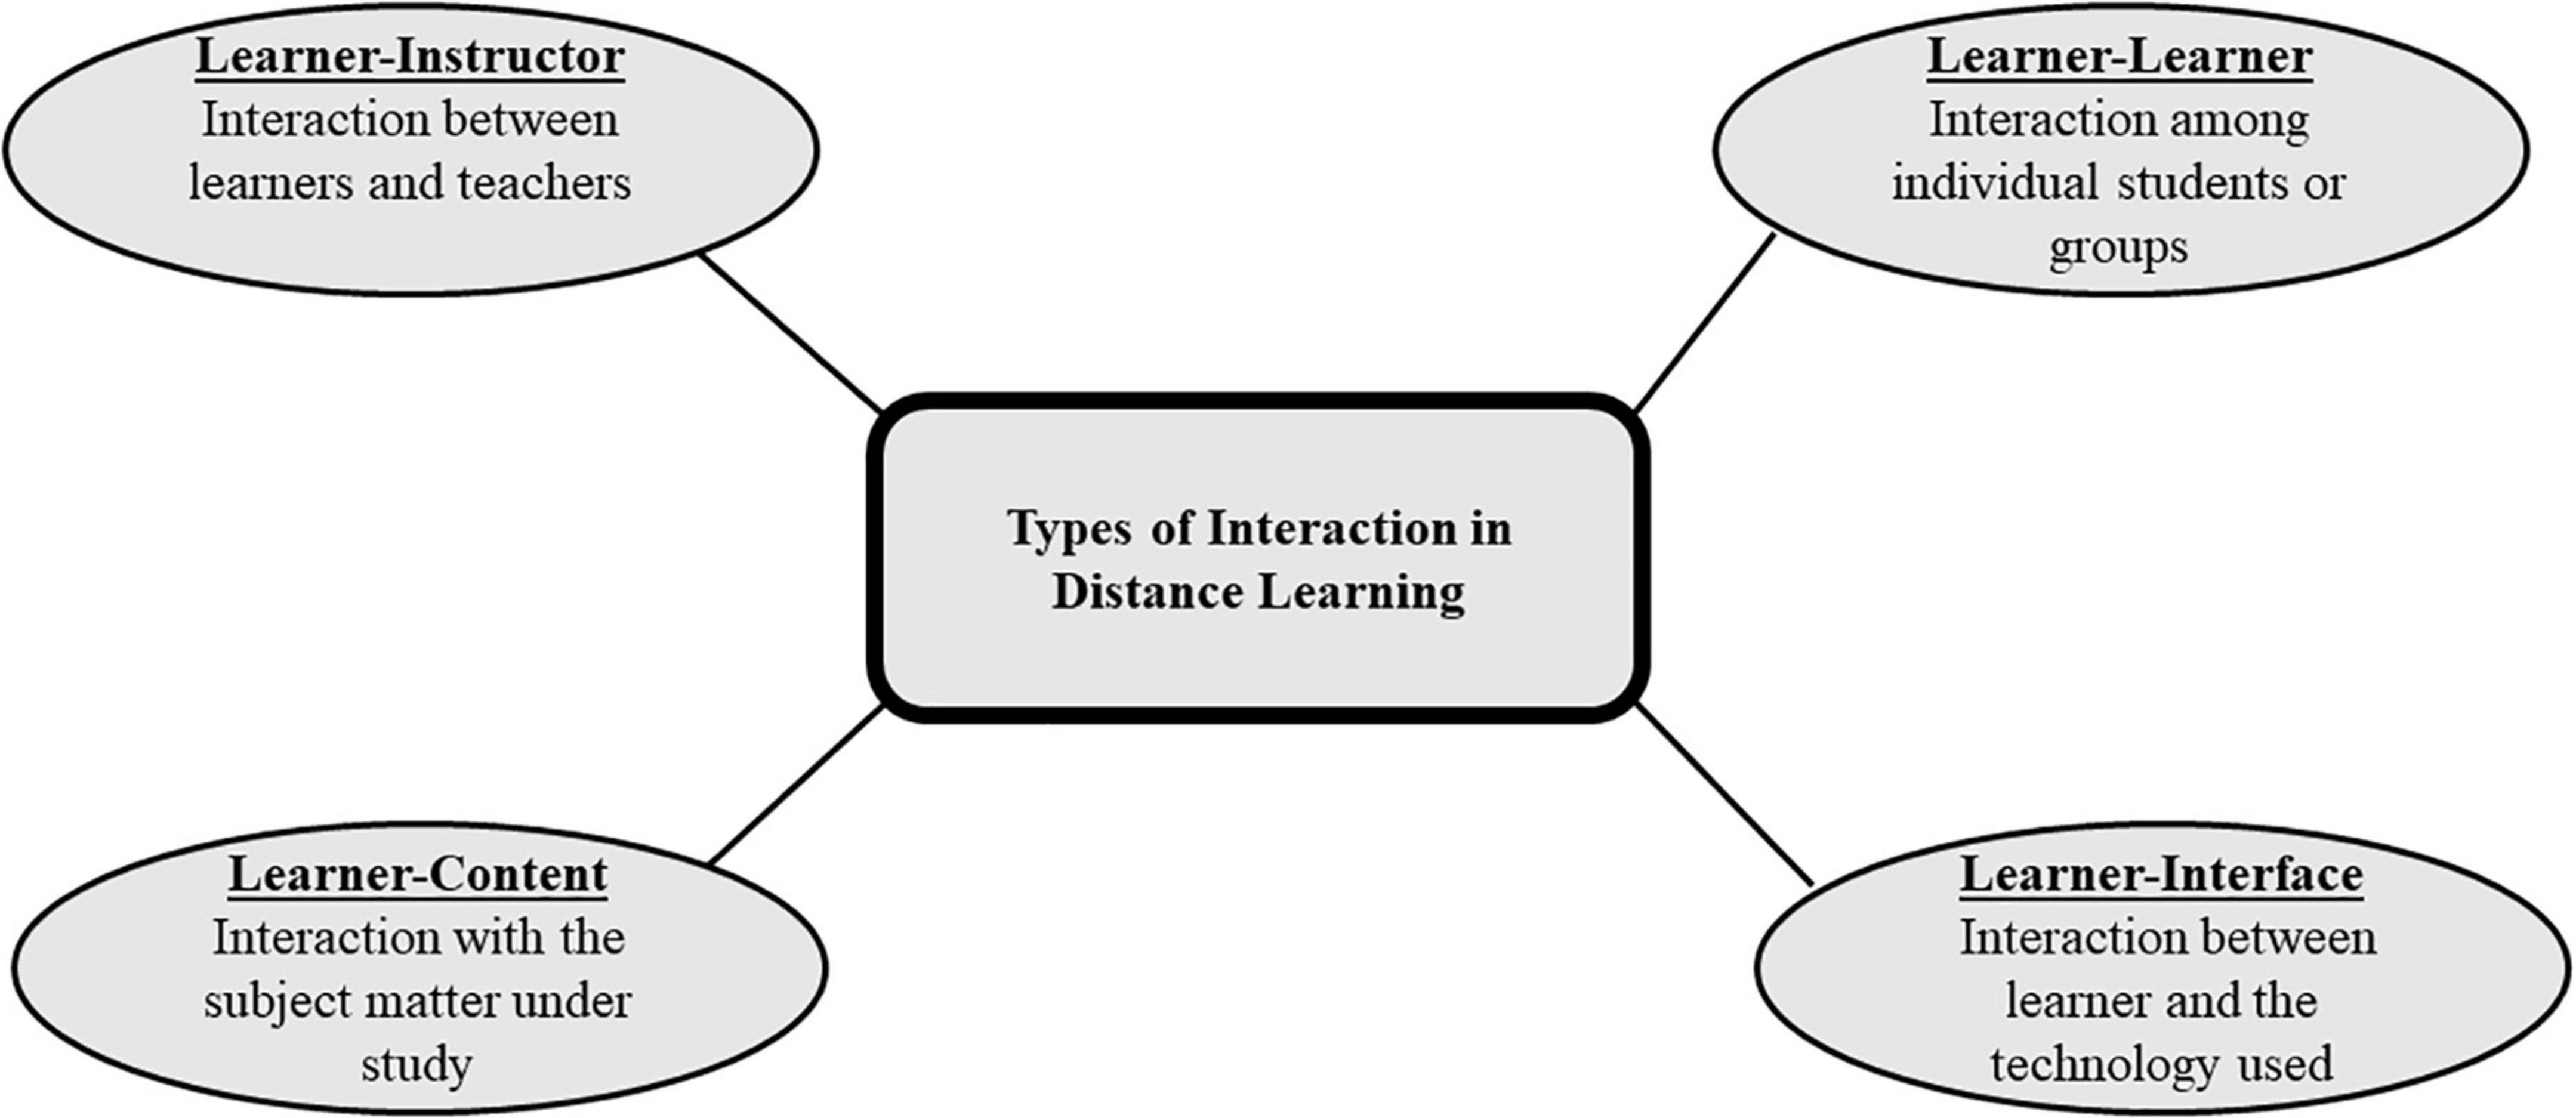 PDF) Student and Lecturer Perceptions of Usability of the Virtual